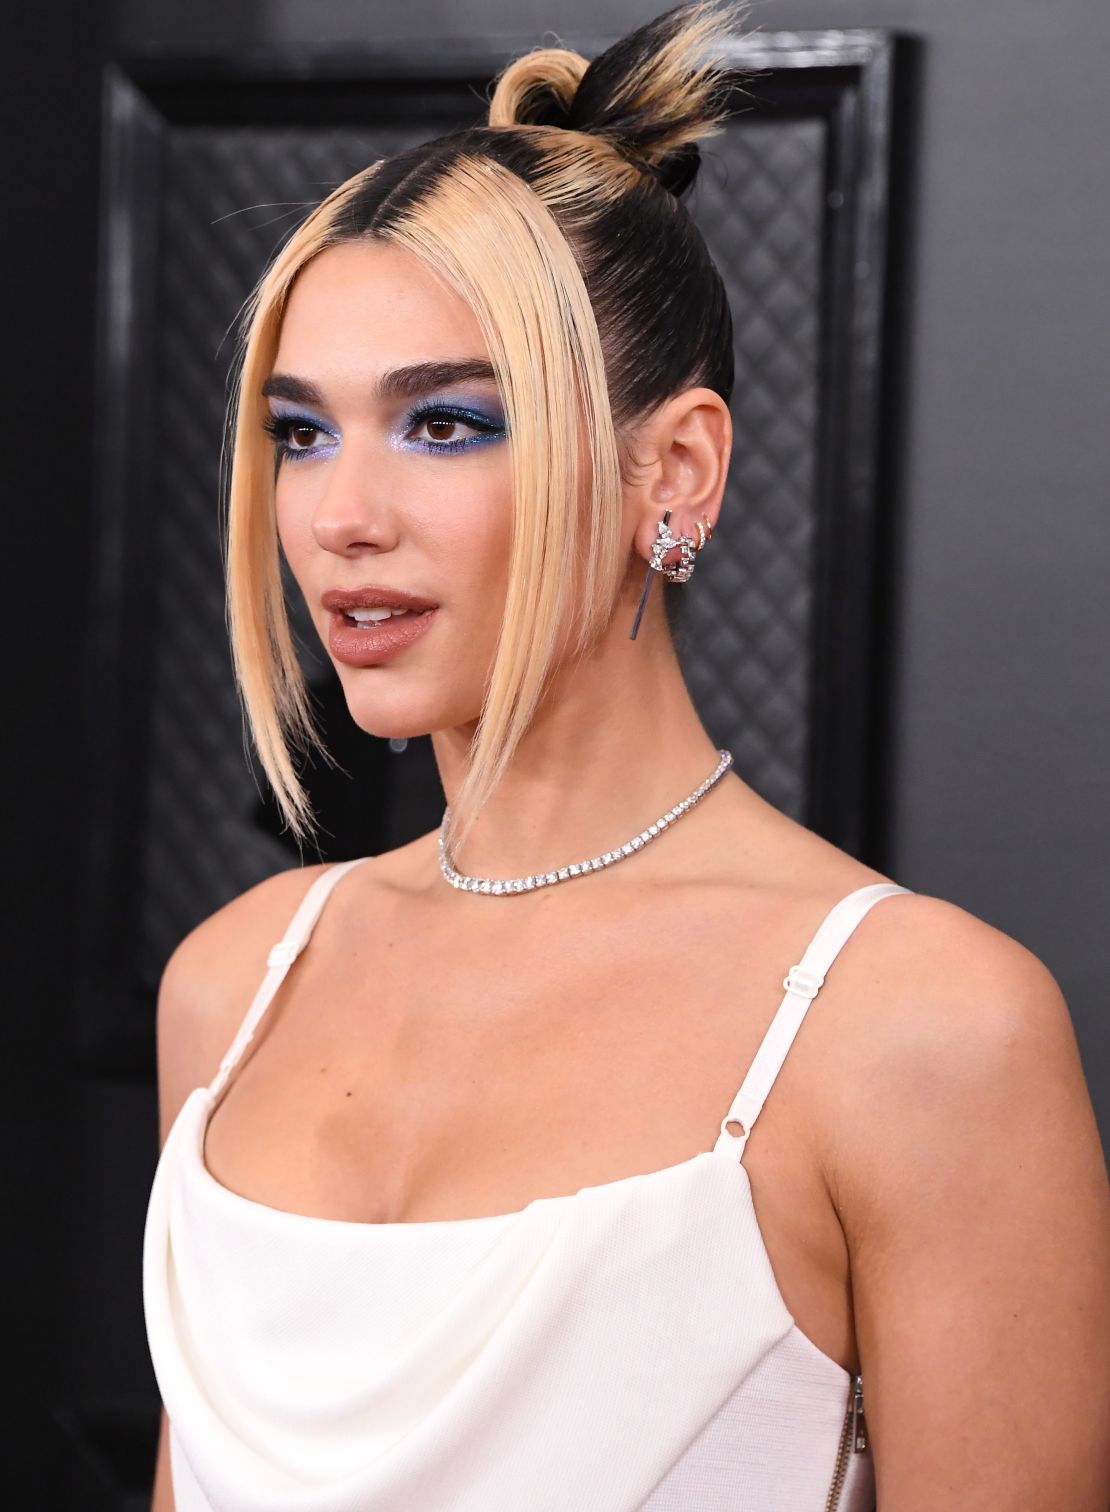 Dua Lipa arrives at the 62nd Annual Grammy Awards at Staples Center on January 26, 2020.